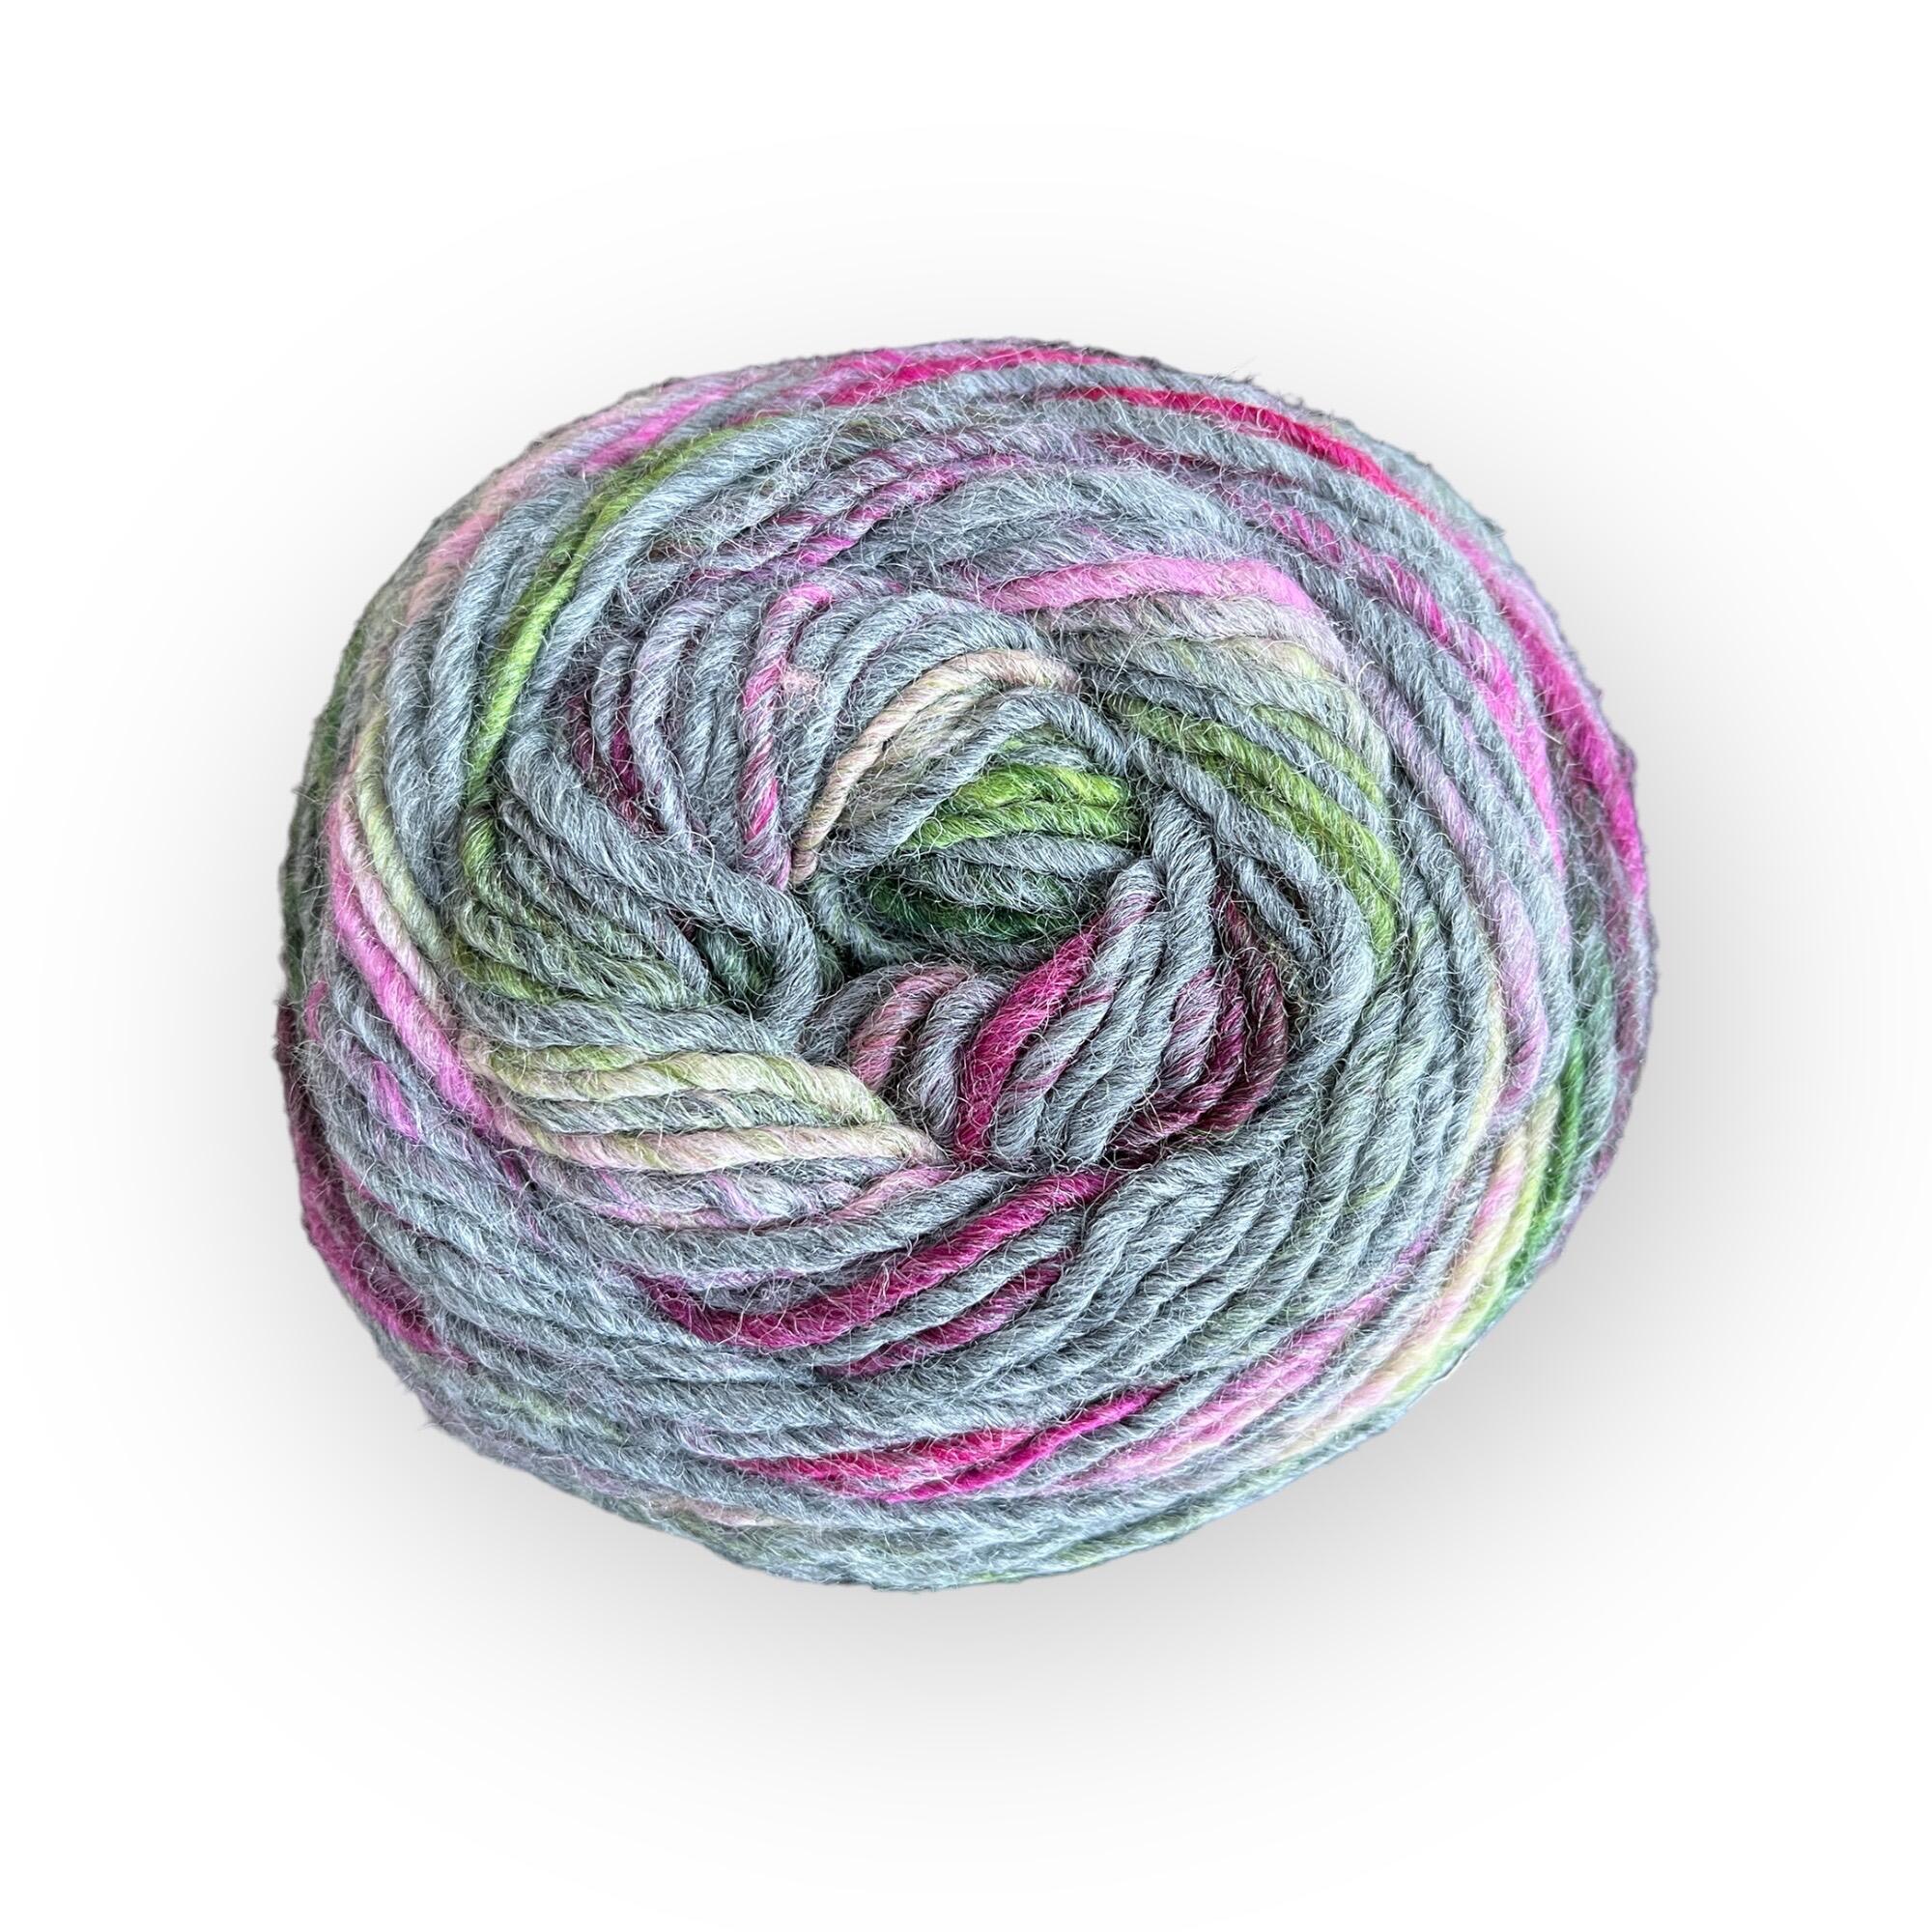 stylcraft knit me crochet me yarn cake in the colour way Aurora 6152